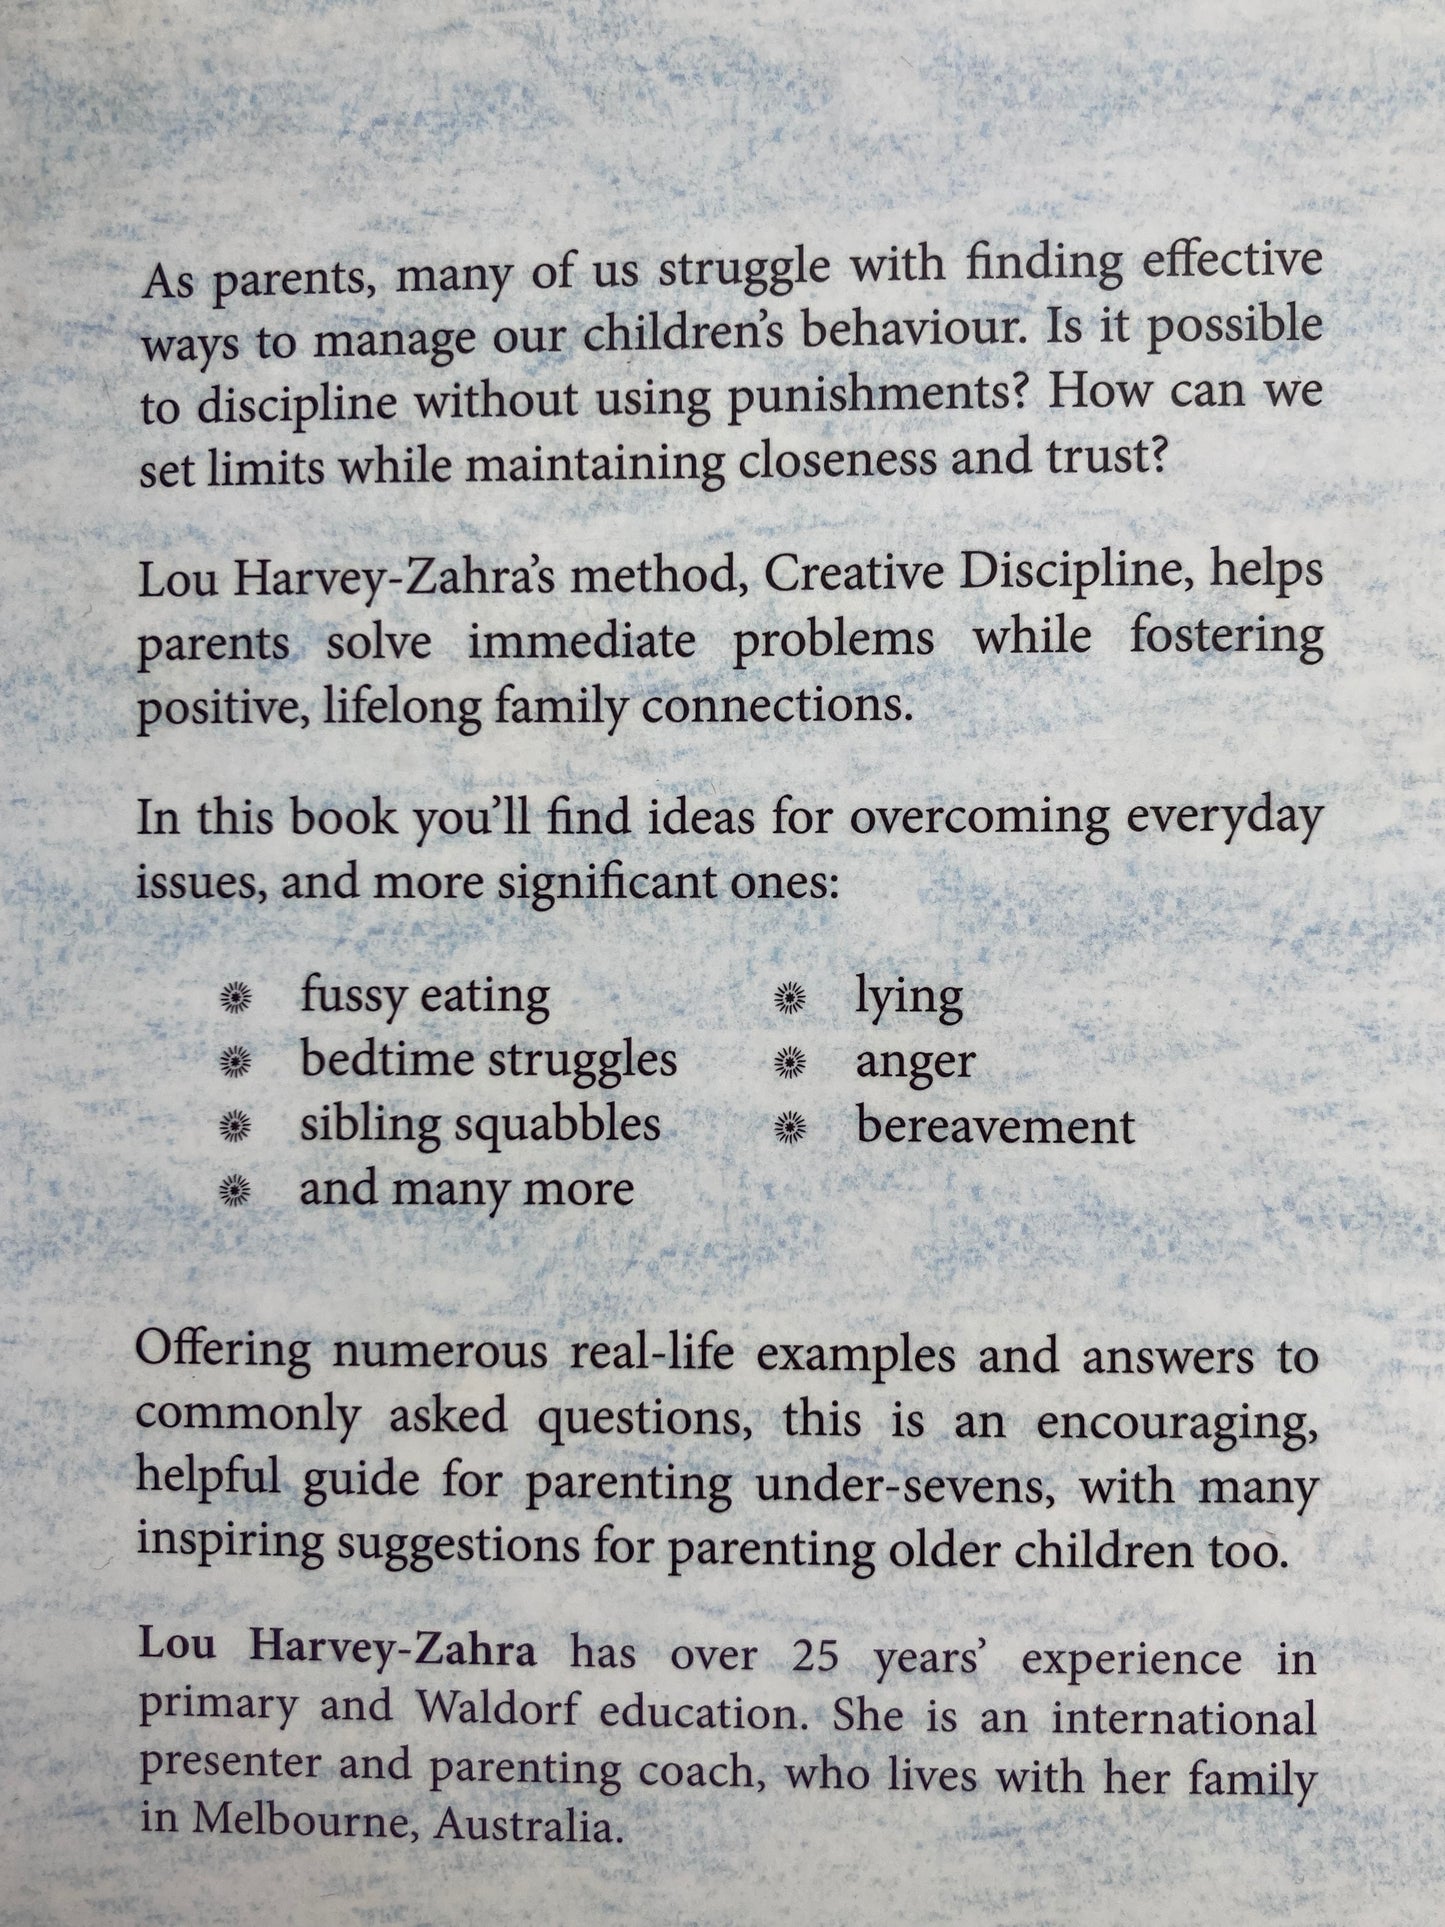 Parenting Resource Book - CREATIVE DISCIPLINE, CONNECTED FAMILY